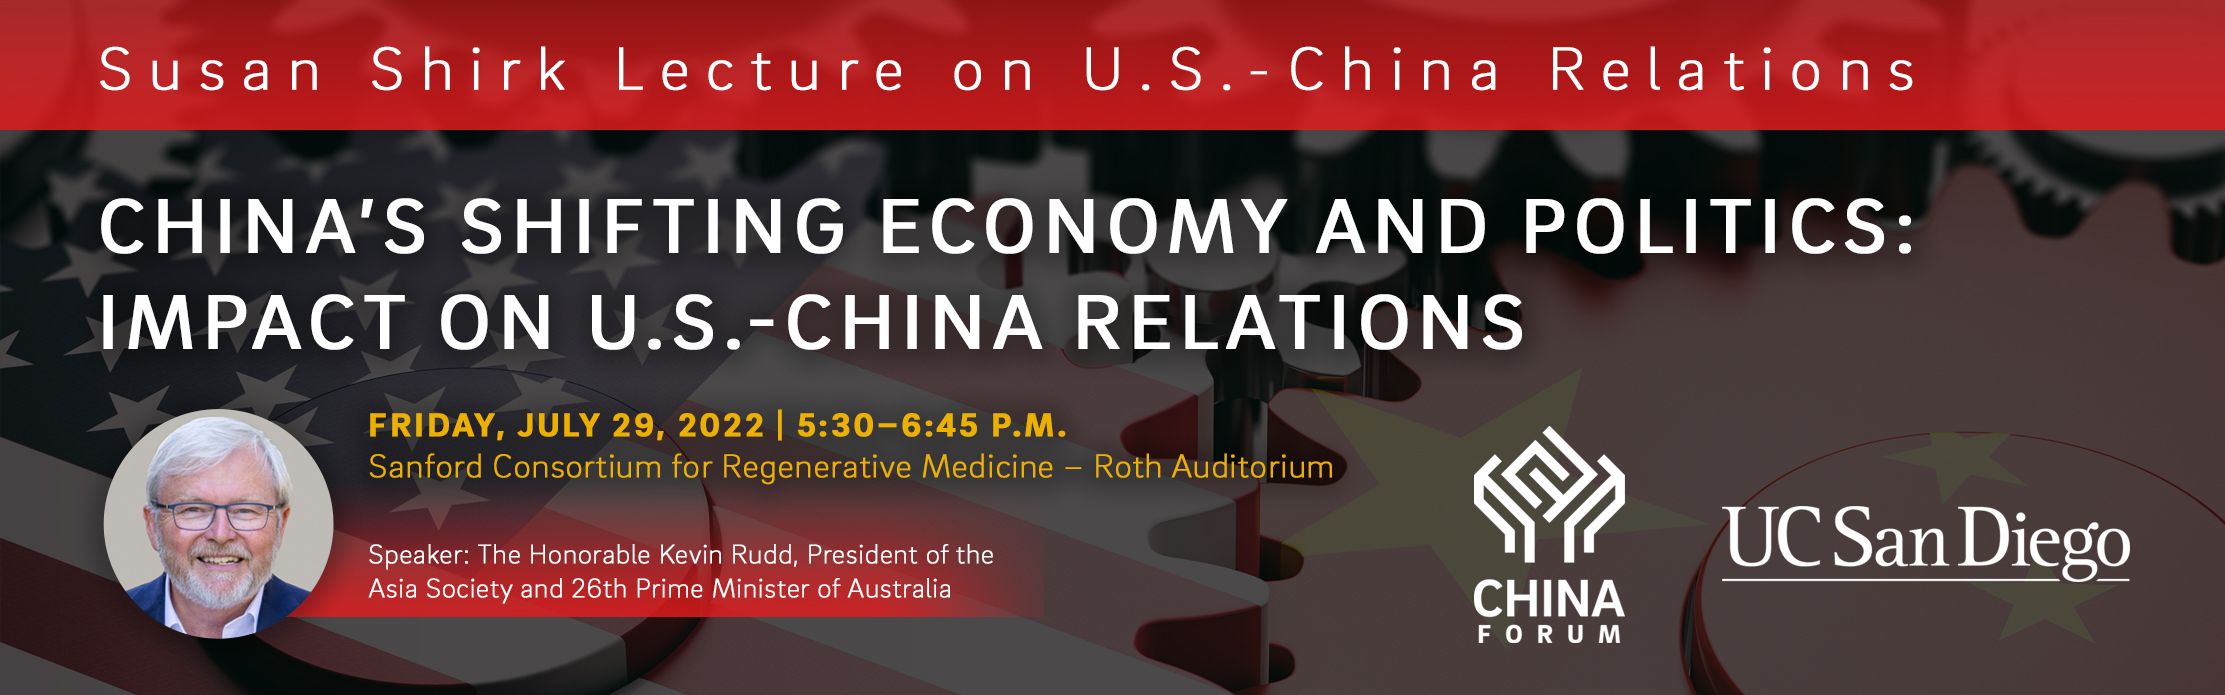 Graphic of banner with a background 3D rendering of cog wheels with USA and China flag colors and patterns, with text noting the named lecture event for Susan Shirk, including a portrait of the 2022 speaker Kevin Rudd.